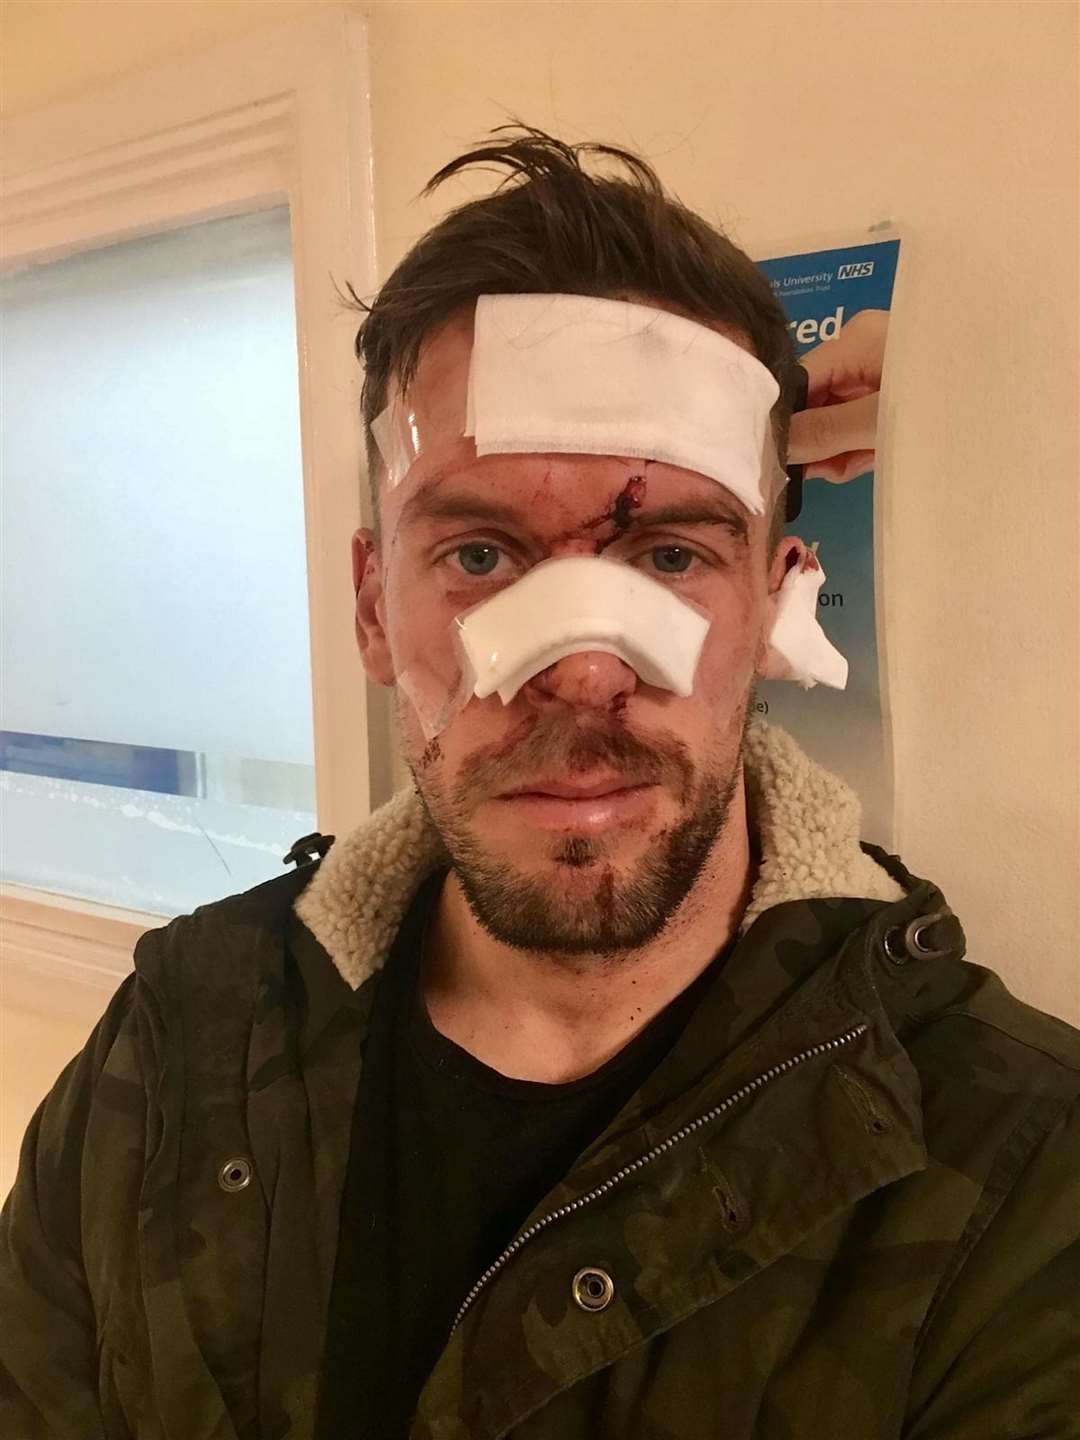 Scott Richards following the attack. Picture: SWNS